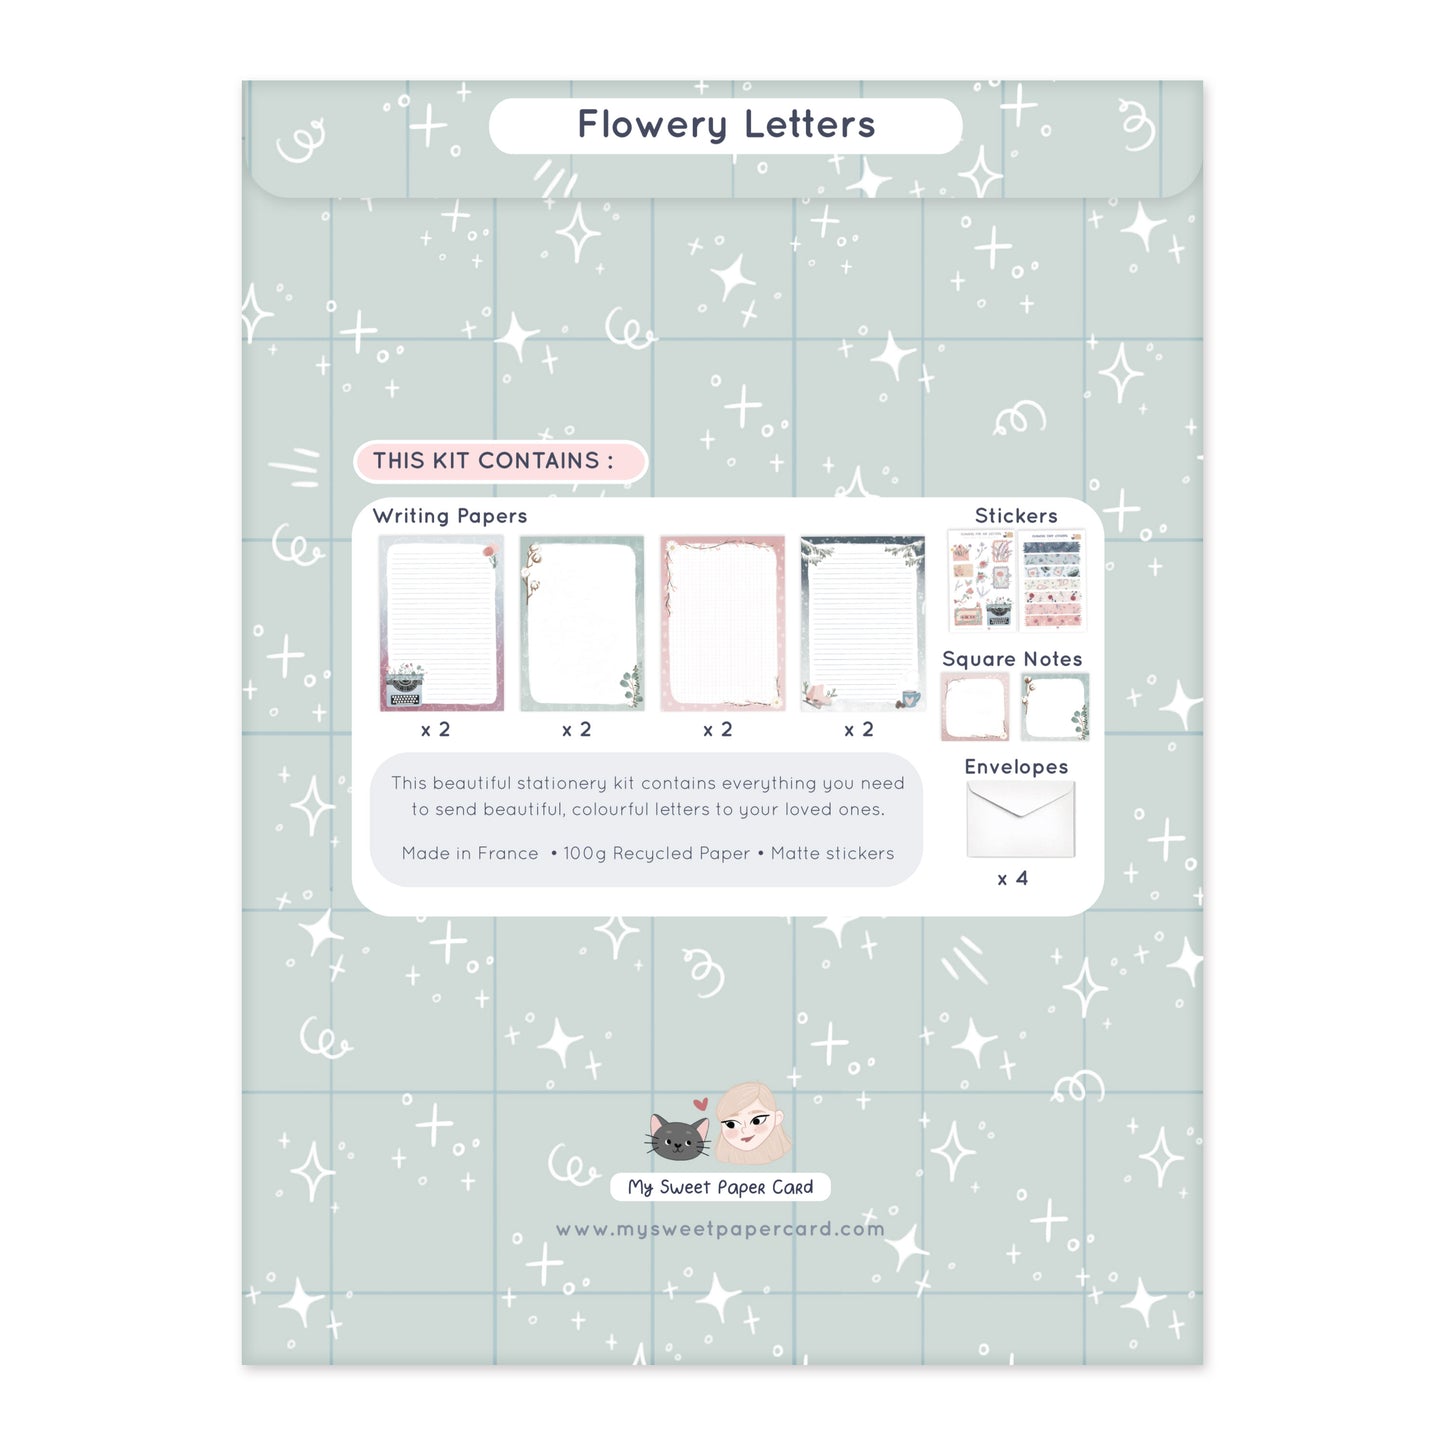 cute stationery set containing writing papers, stickers, square notes and envelopes